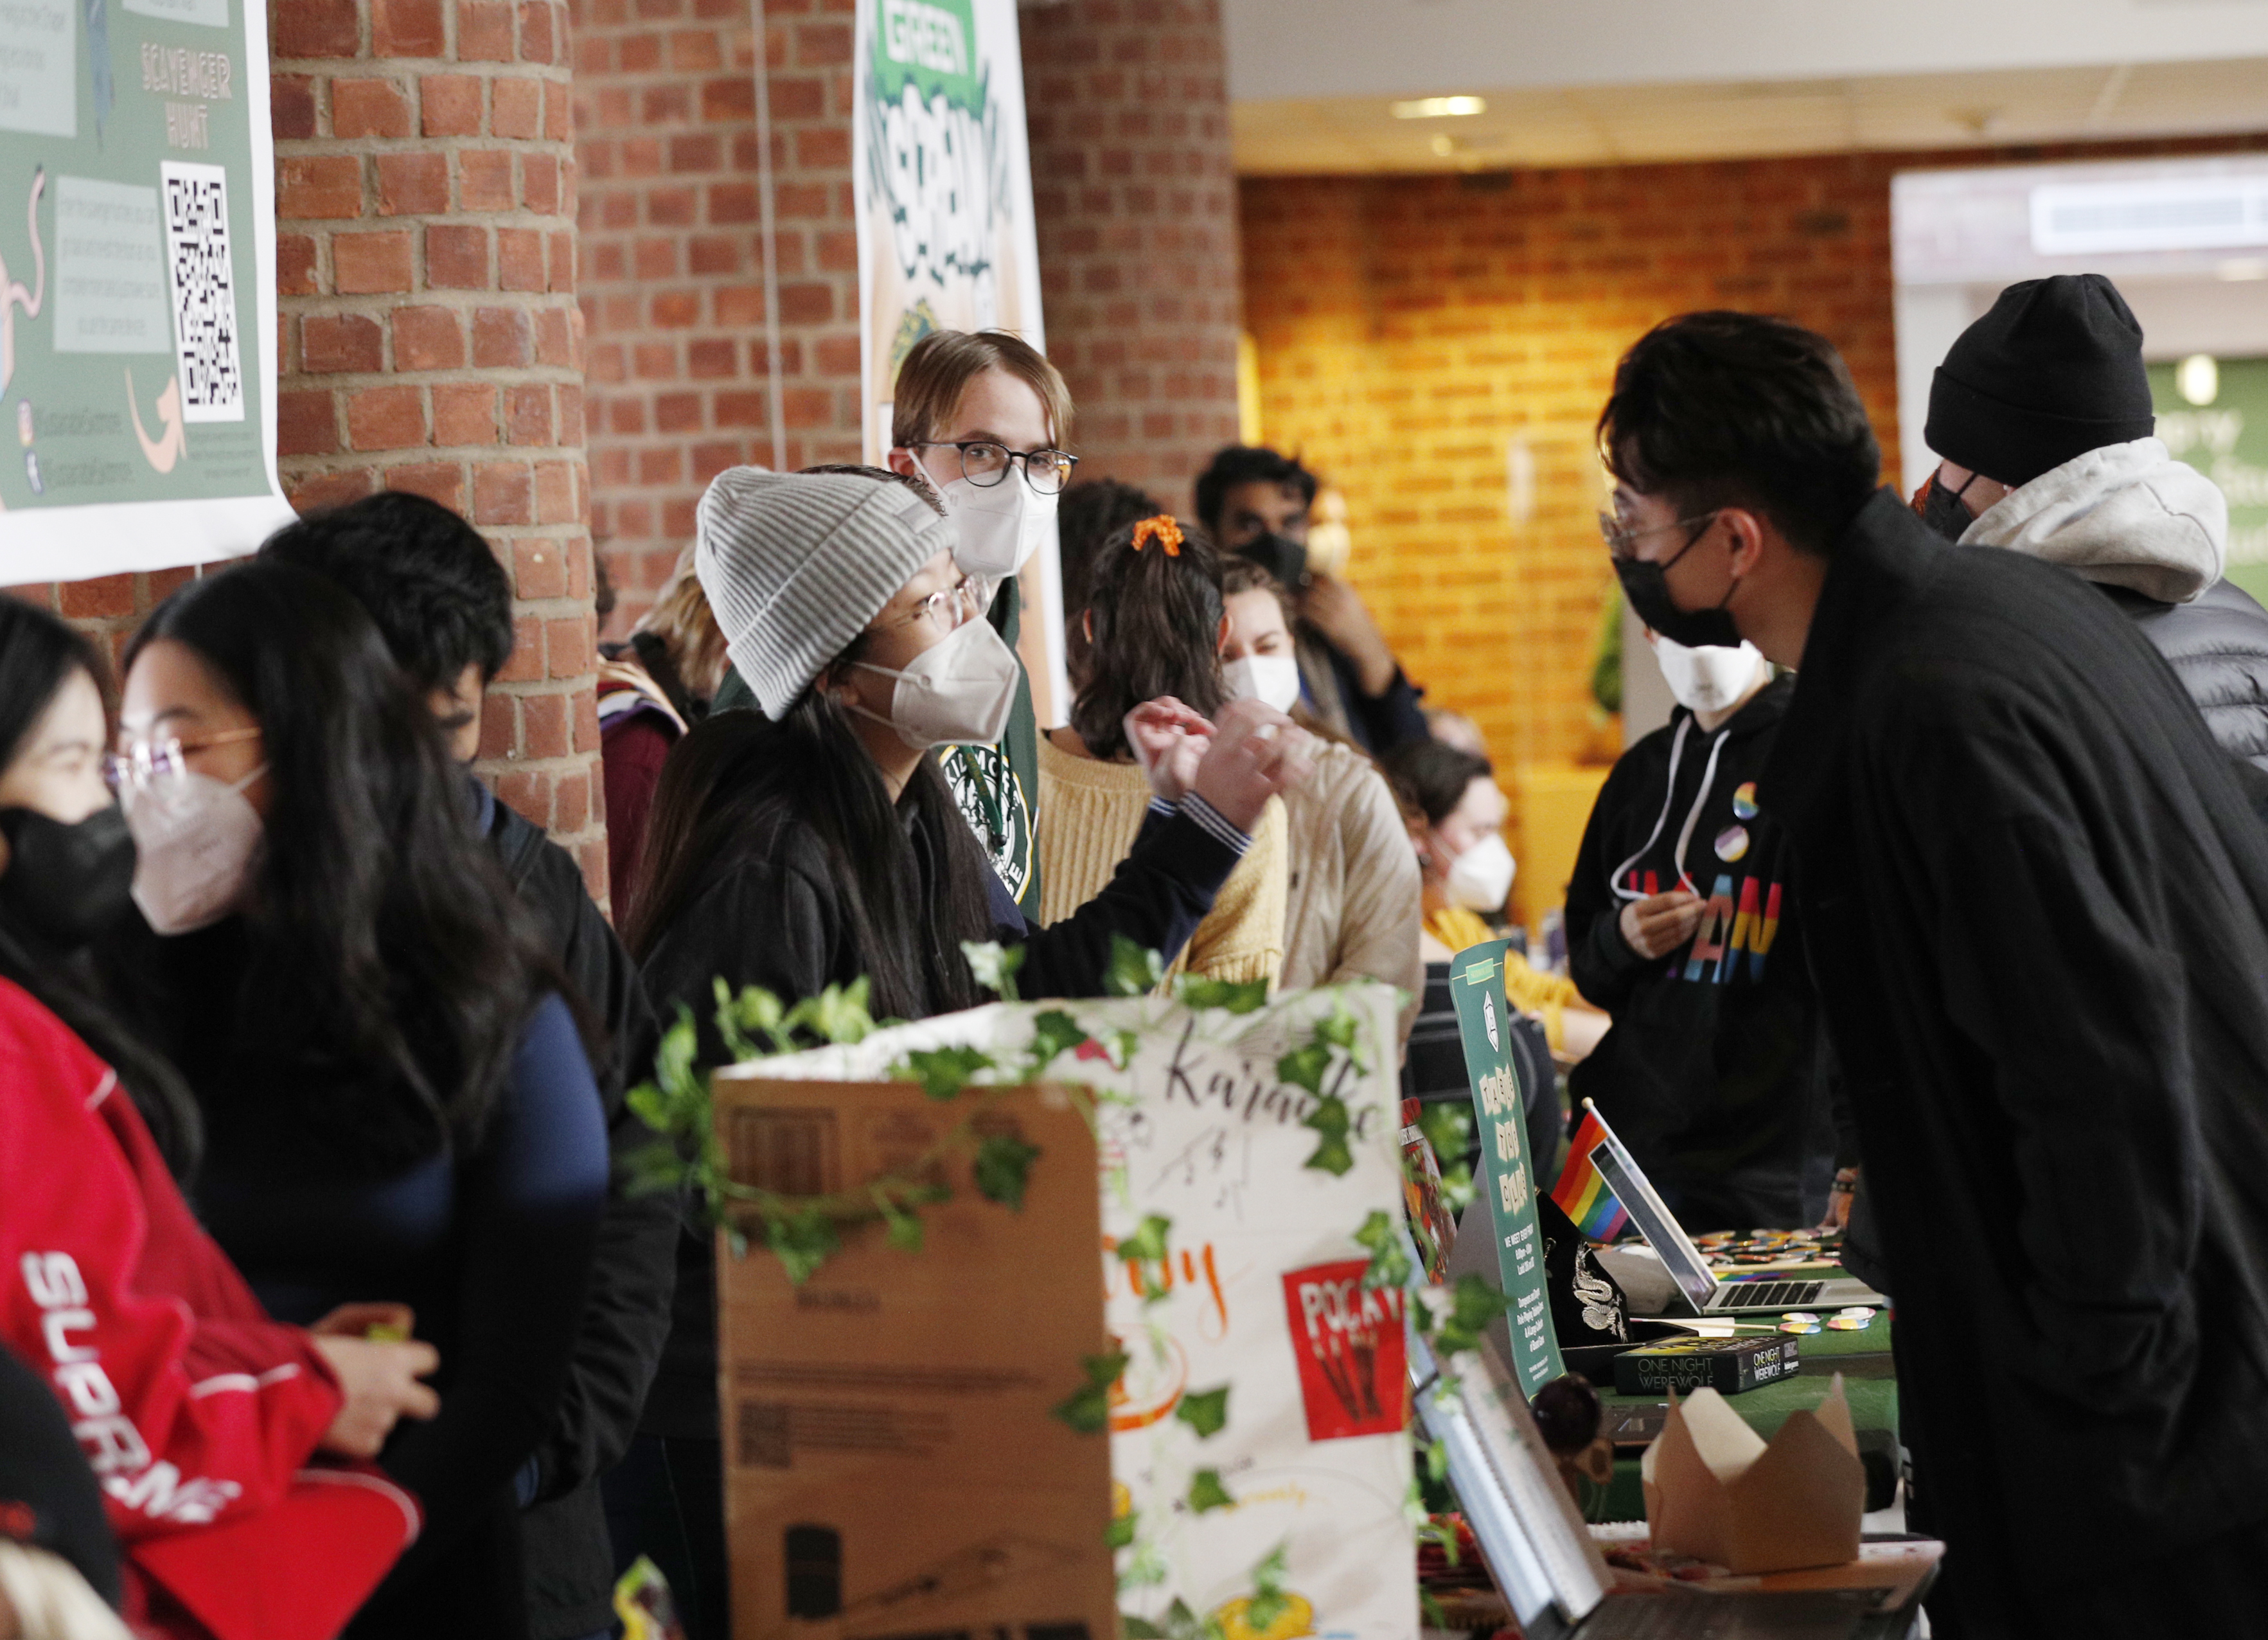 Students explore opportunities to get involved in Club Fair, a showcase of scores of student clubs at Skidmore.  